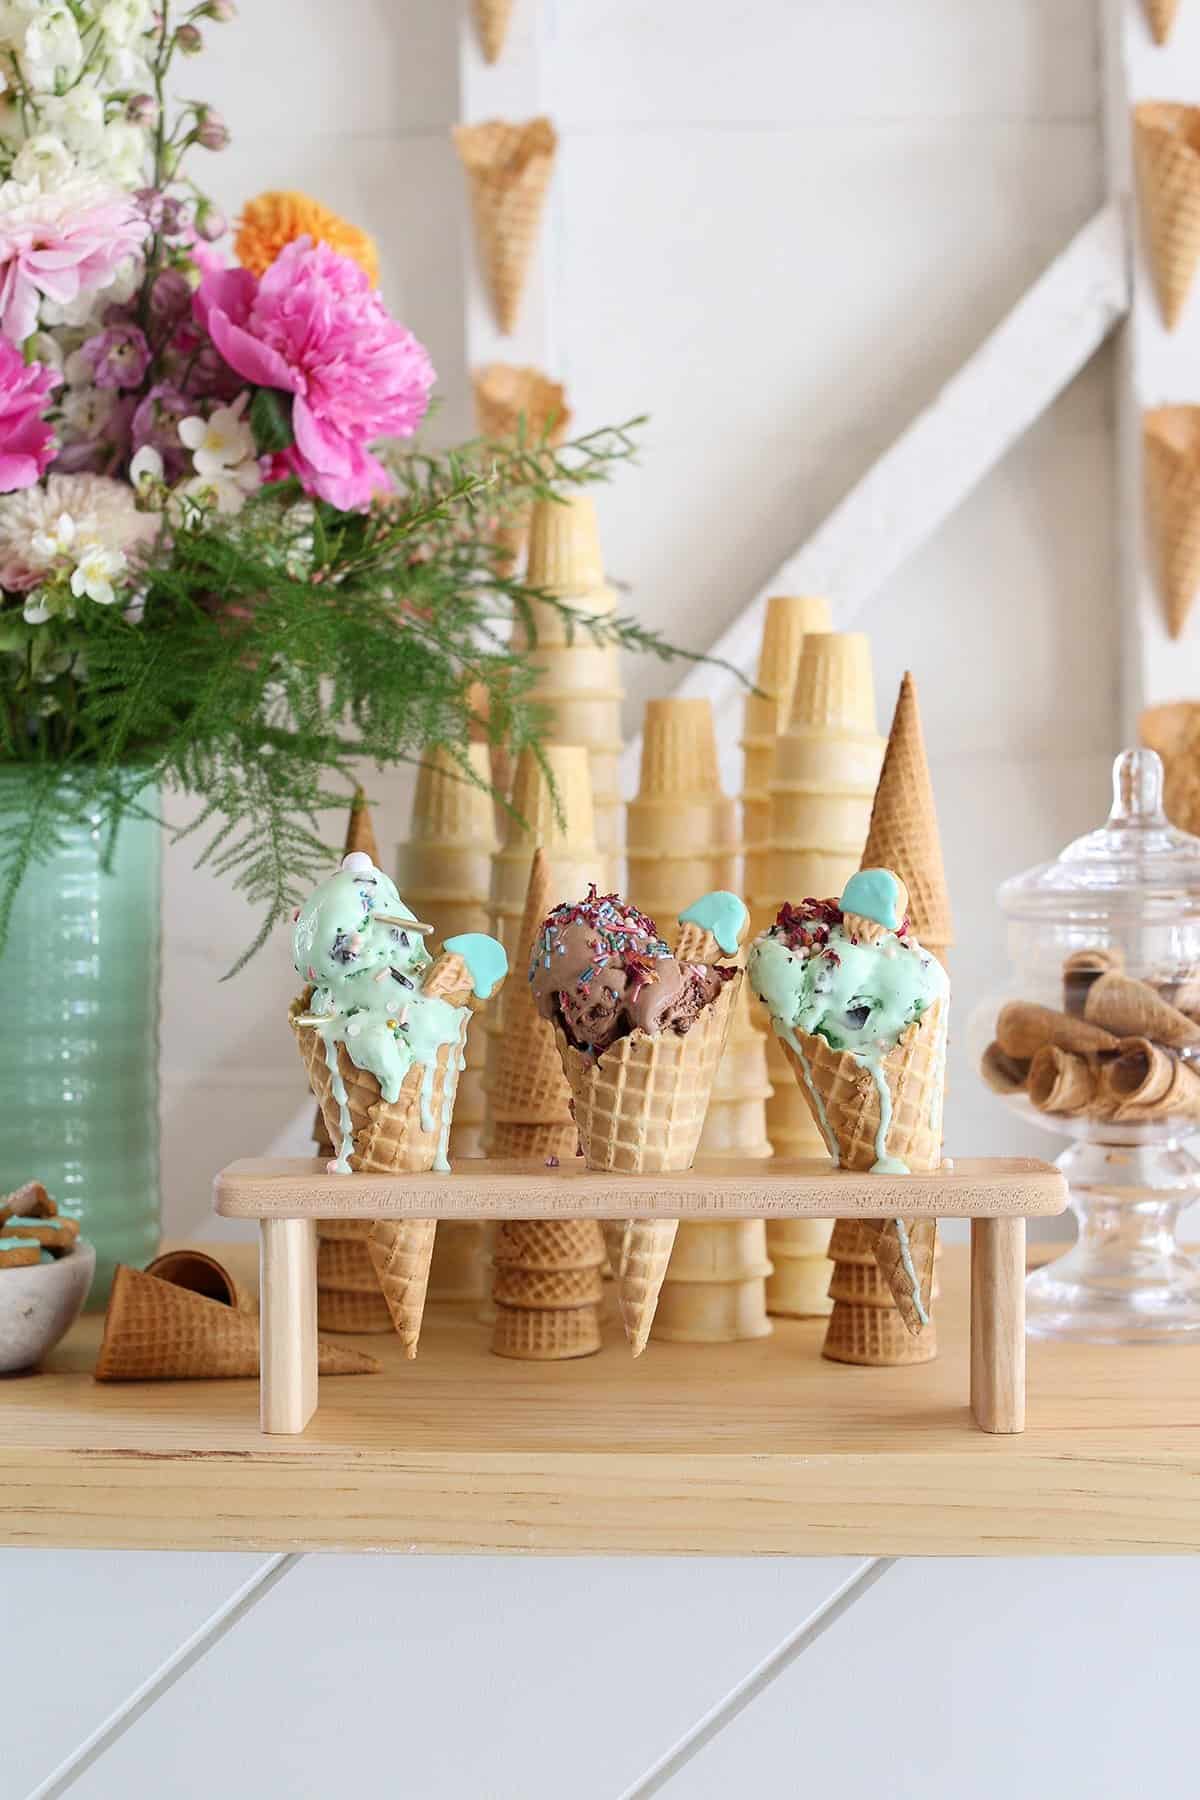 ice cream bar with ice cream cones and colorful flowers